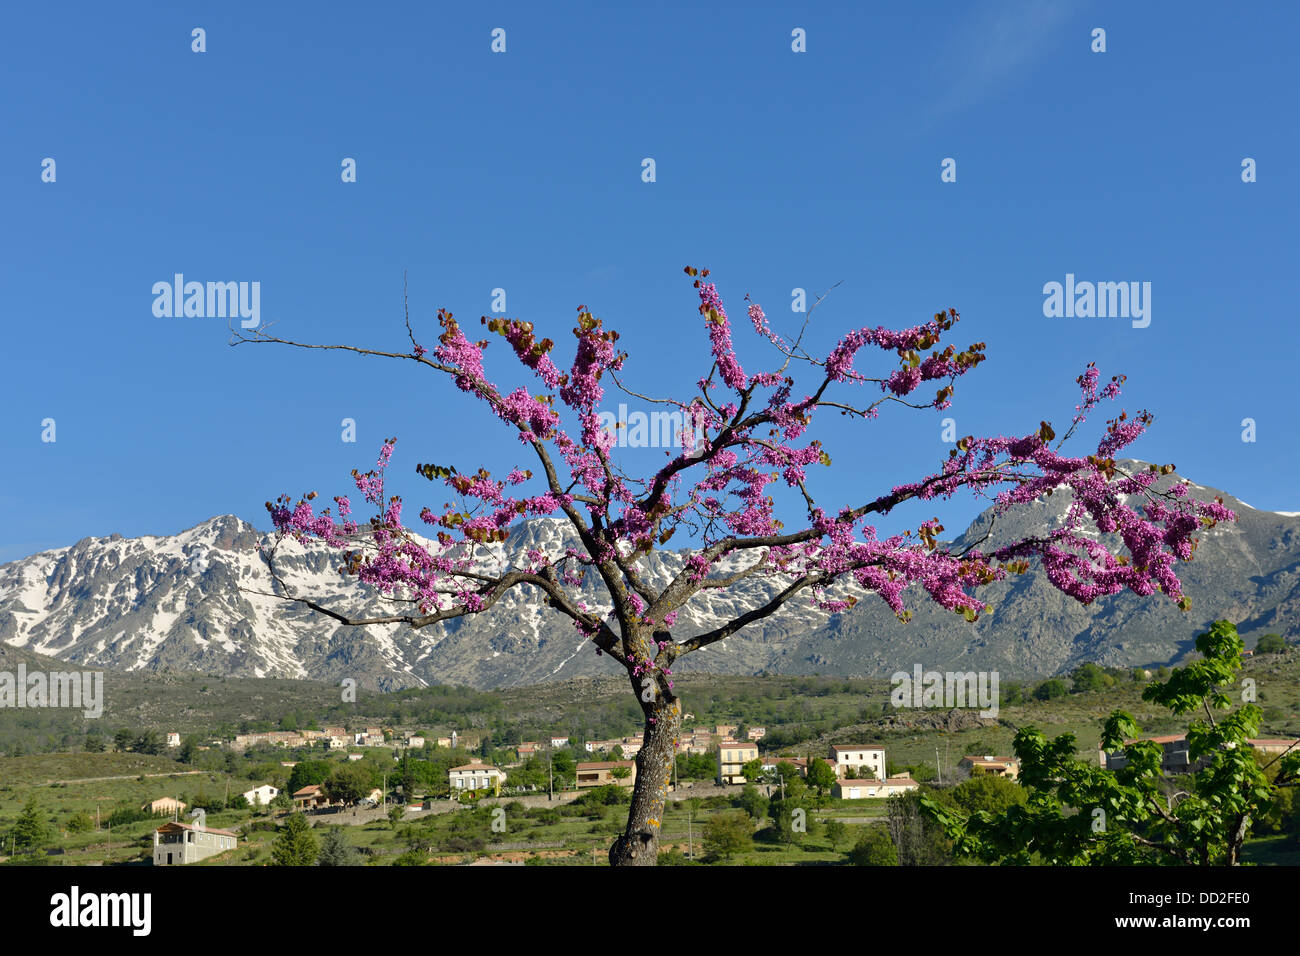 Tree in bloom with the Central Massif mountains in the background, Calacuccia, Niolo Valley, Corsica, France Stock Photo